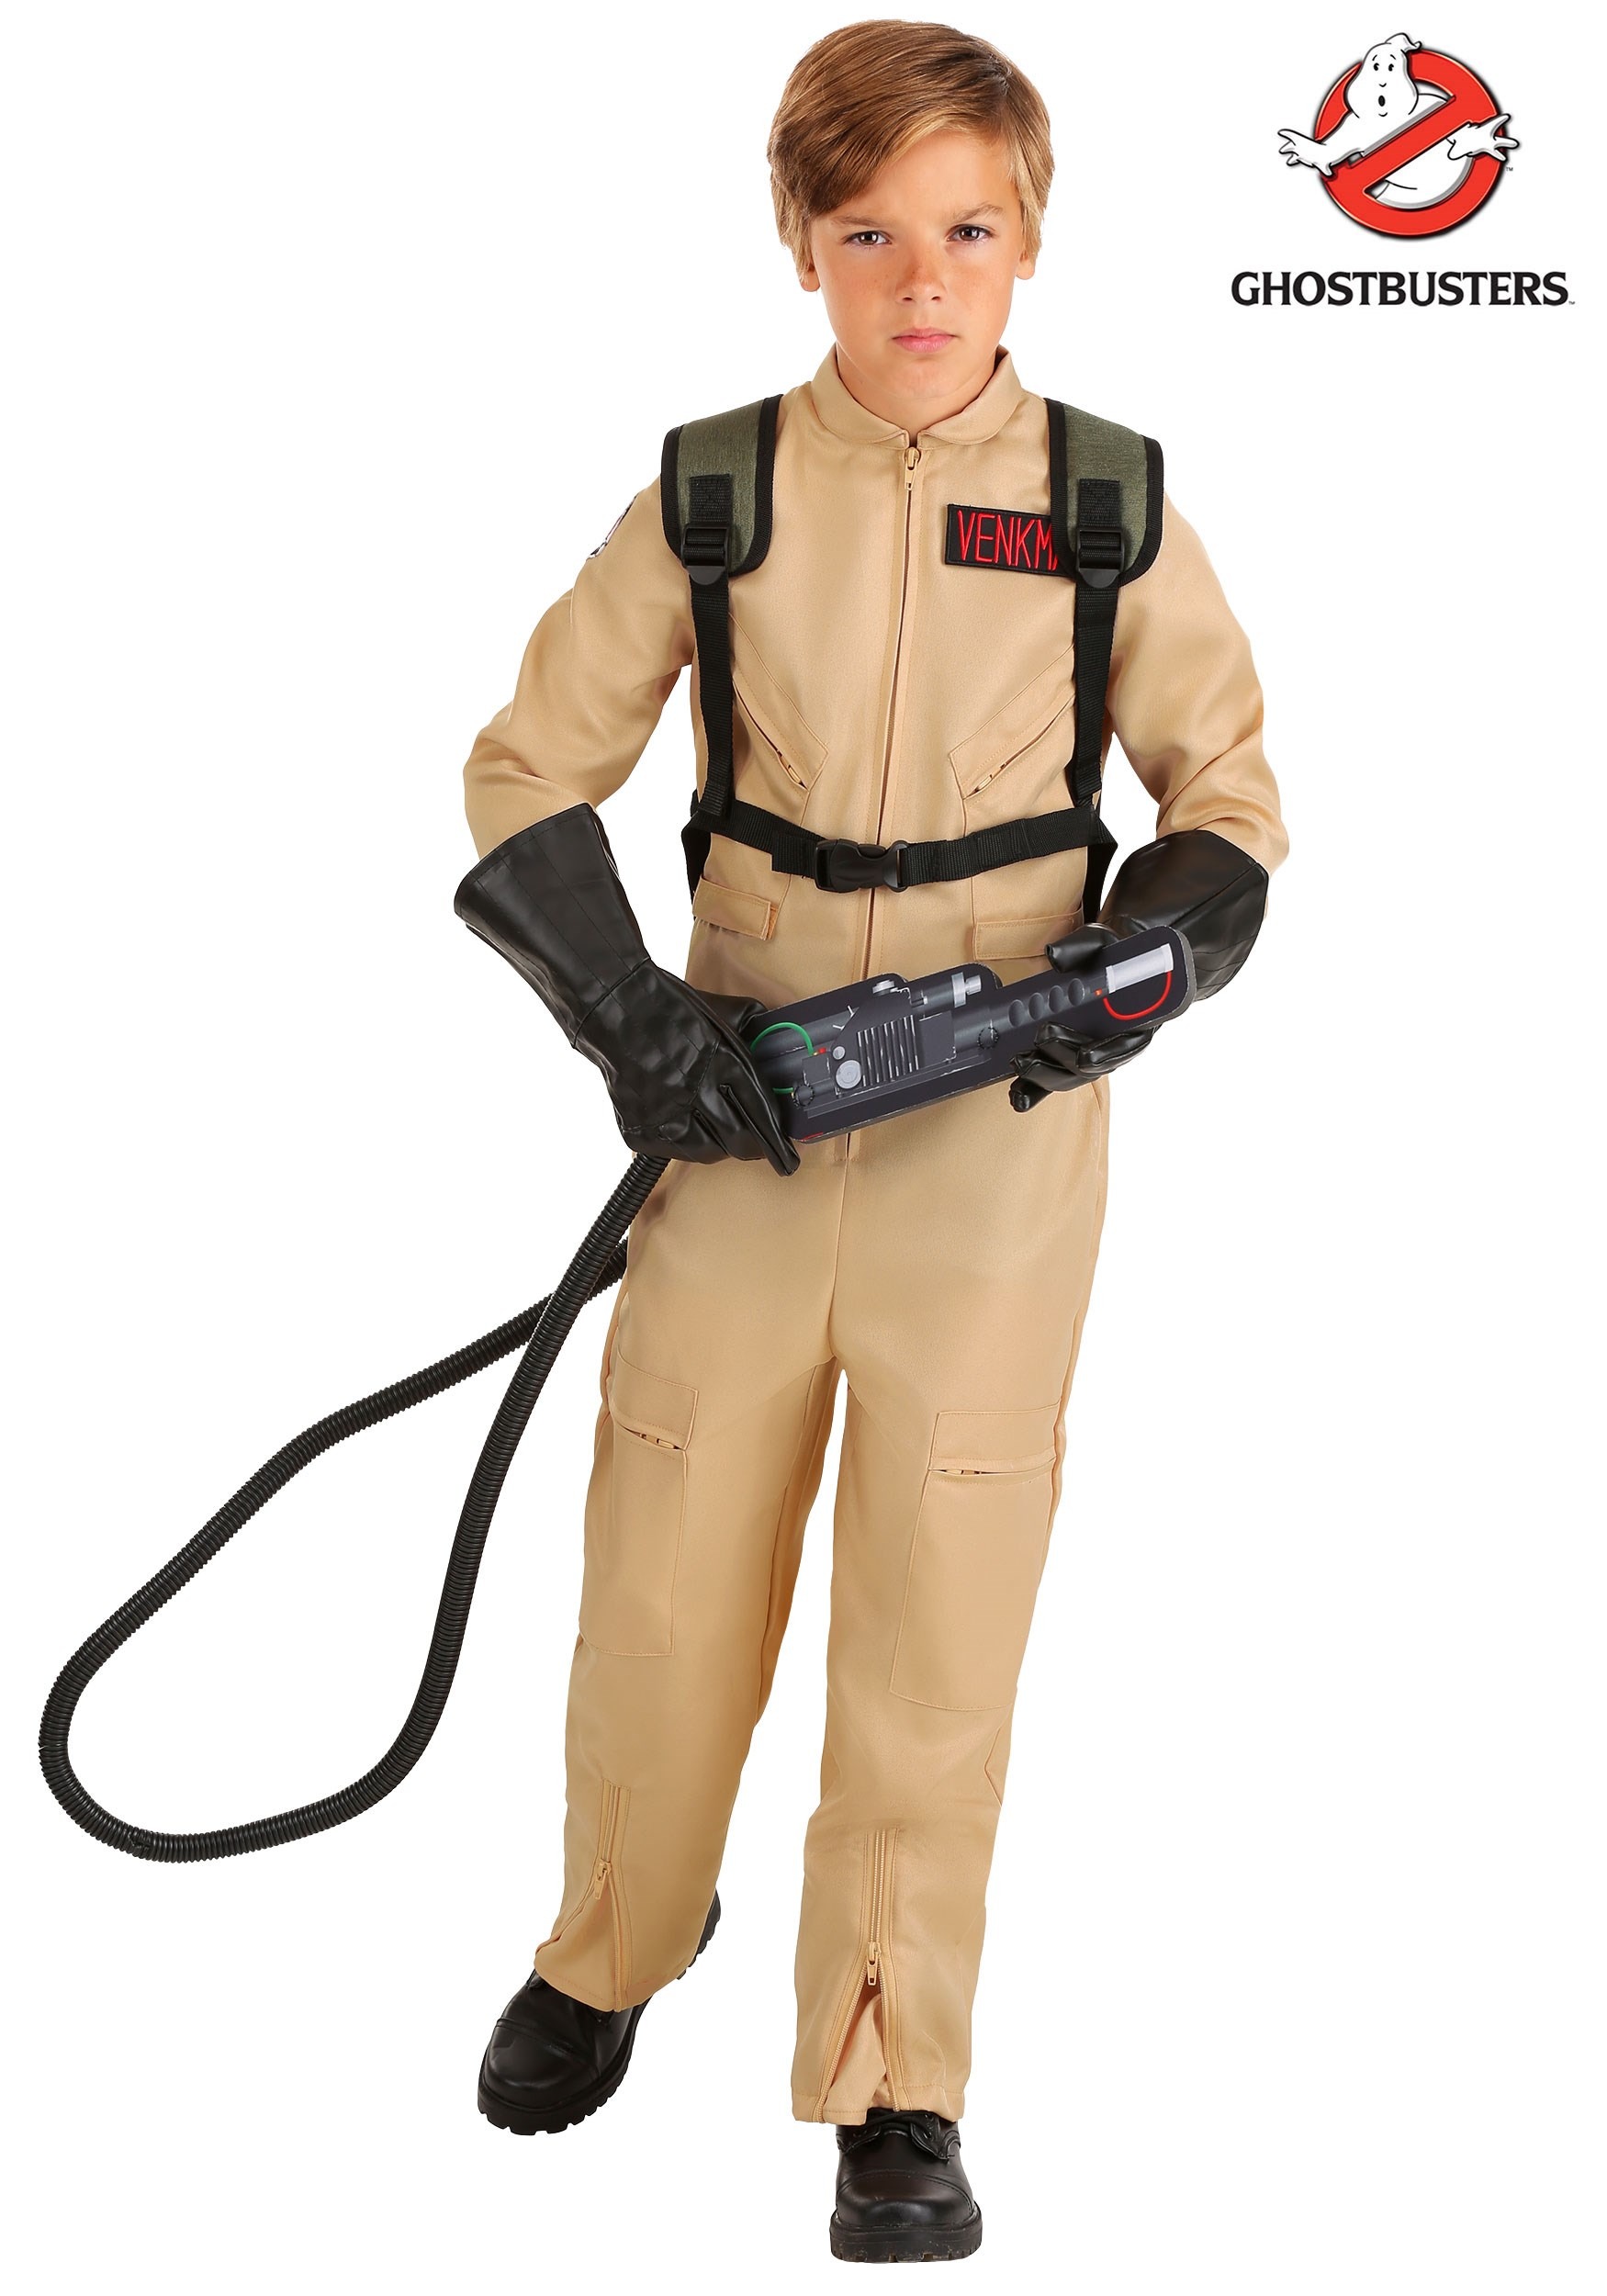 Kids Deluxe Costume Ghostbusters